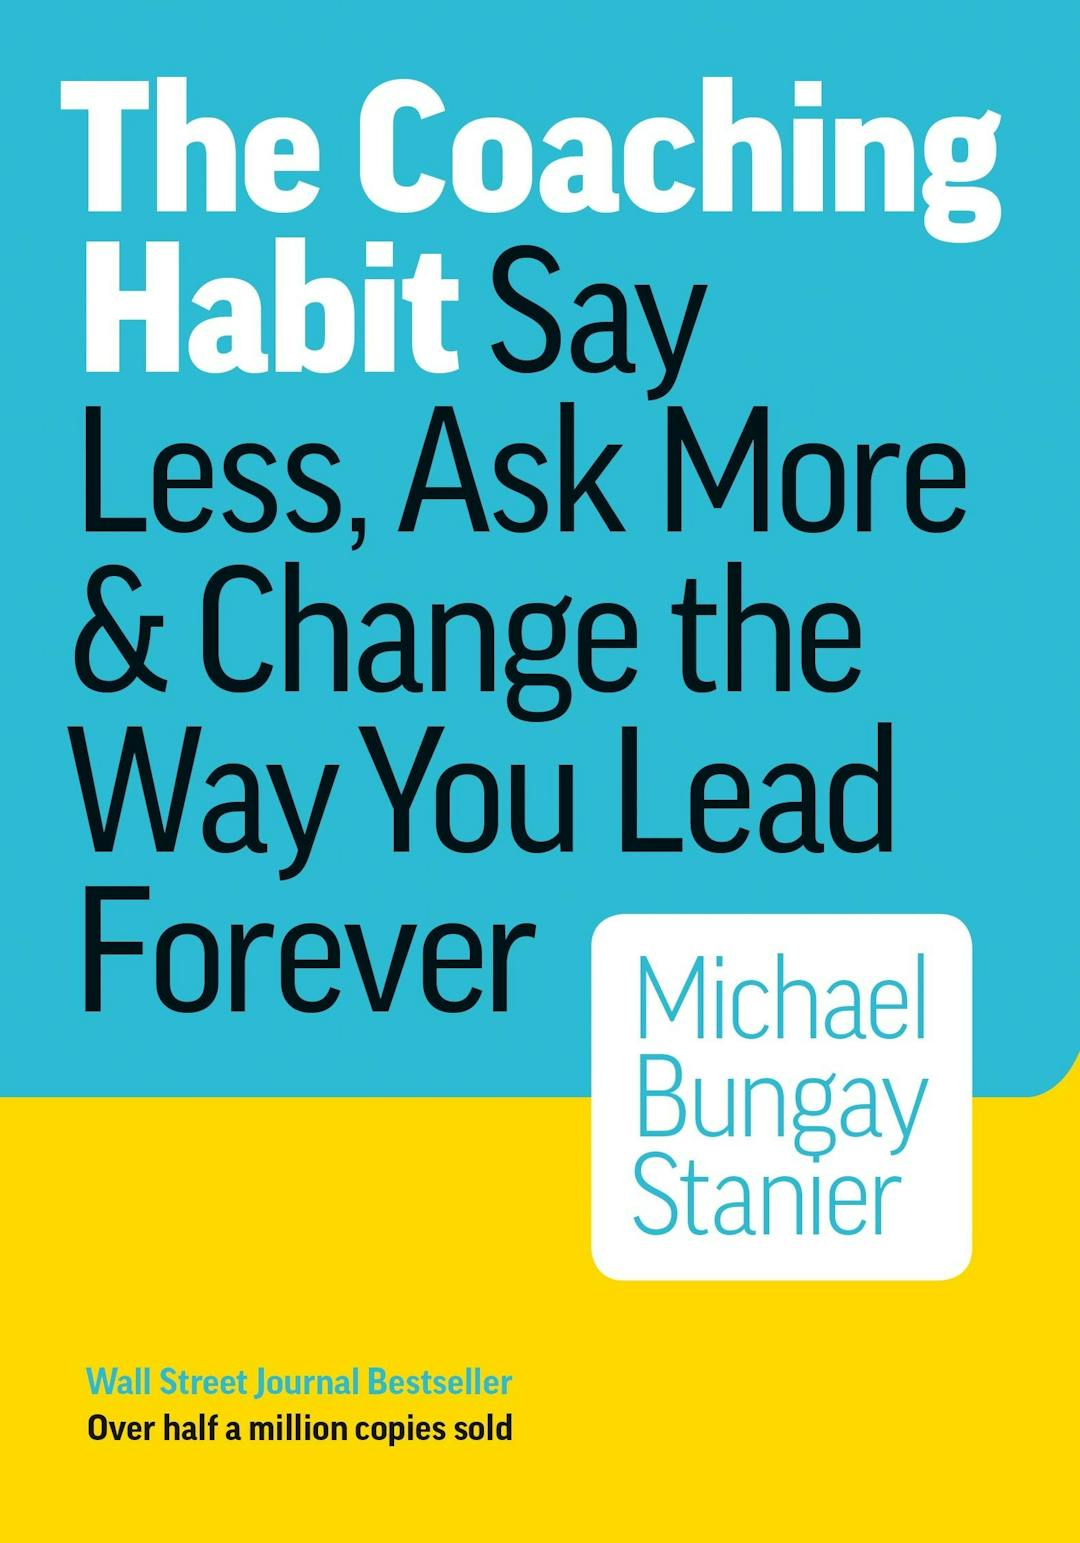 The Coaching Habit: Say Less, Ask More & Change the Way You Lead Forever, by Michael Bungay Stanier